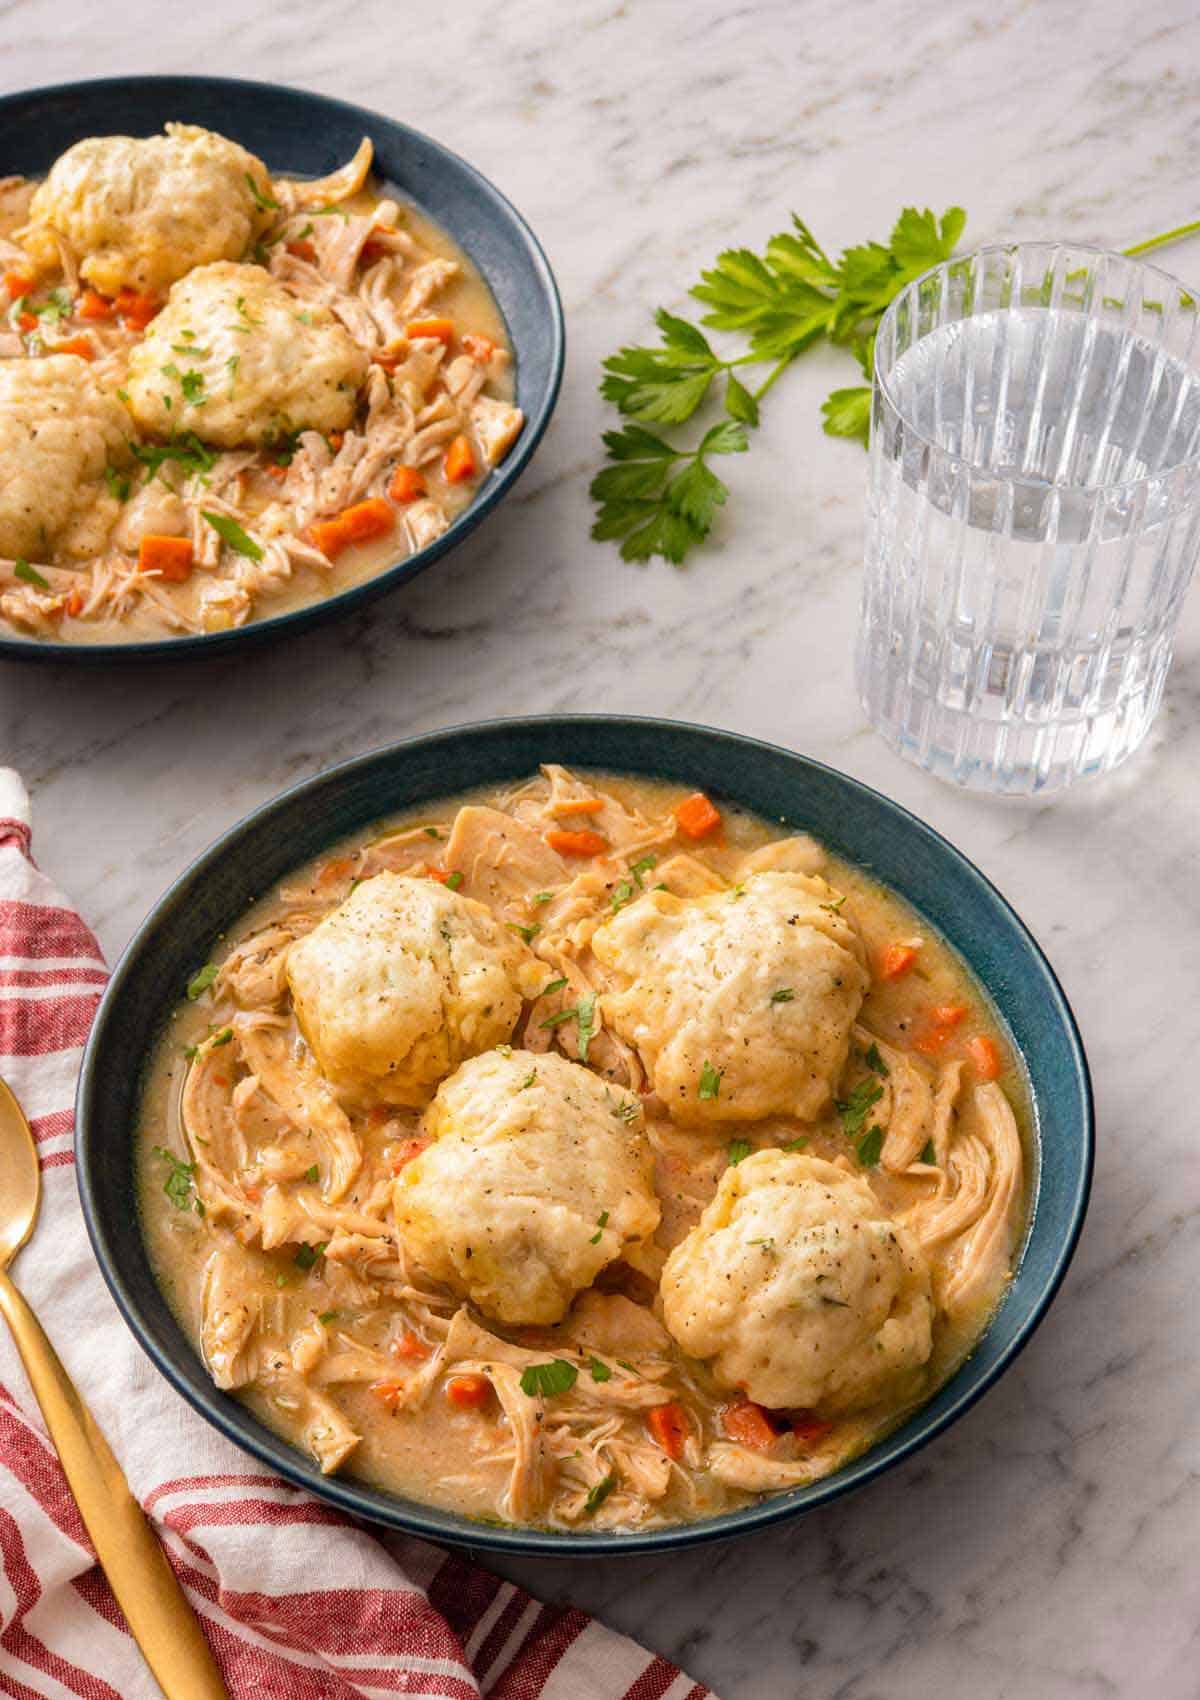 Two bowls of chicken and dumplings with one in front, with a glass of water on the side.